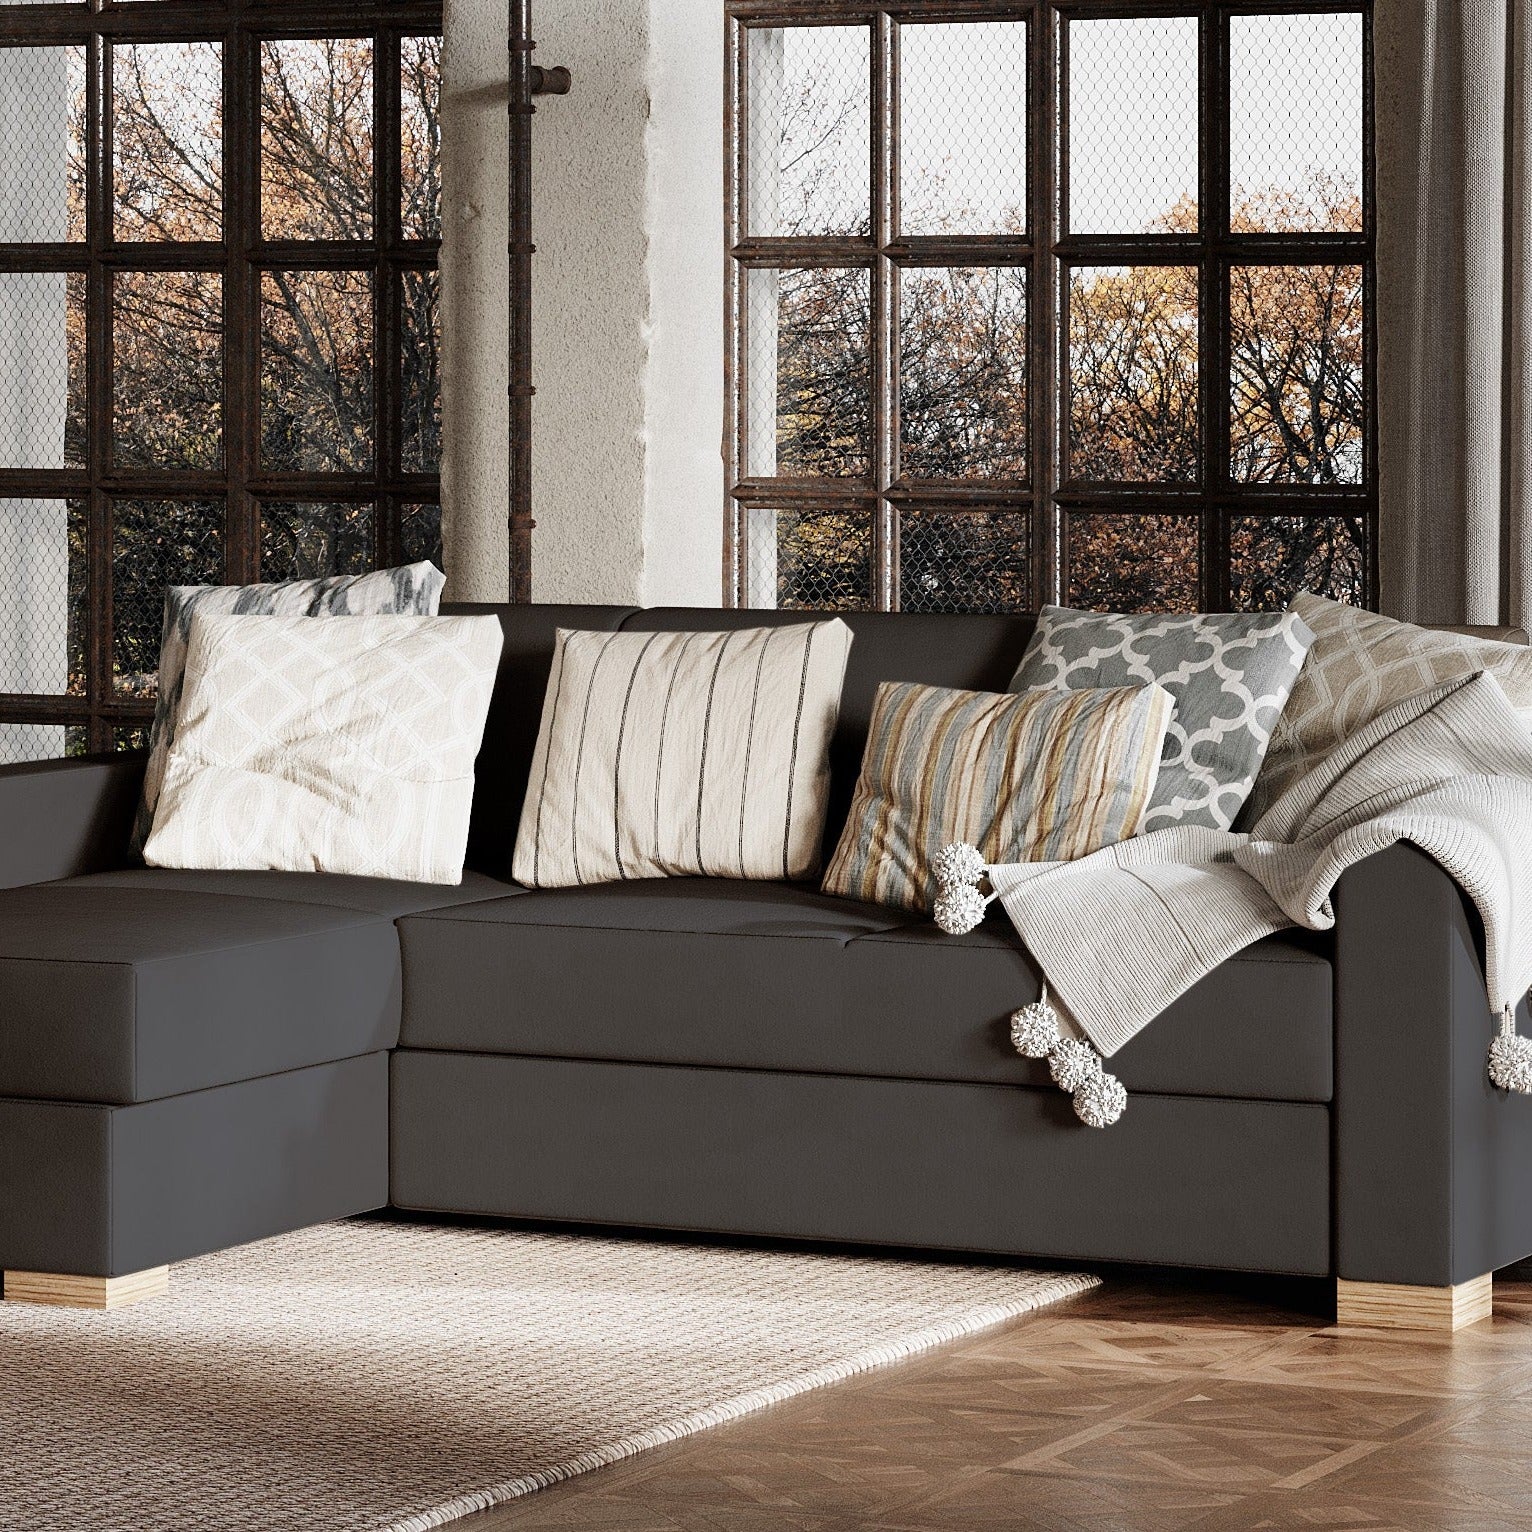 STABLE Corner Sofa Right upholstery colour grey-interior view